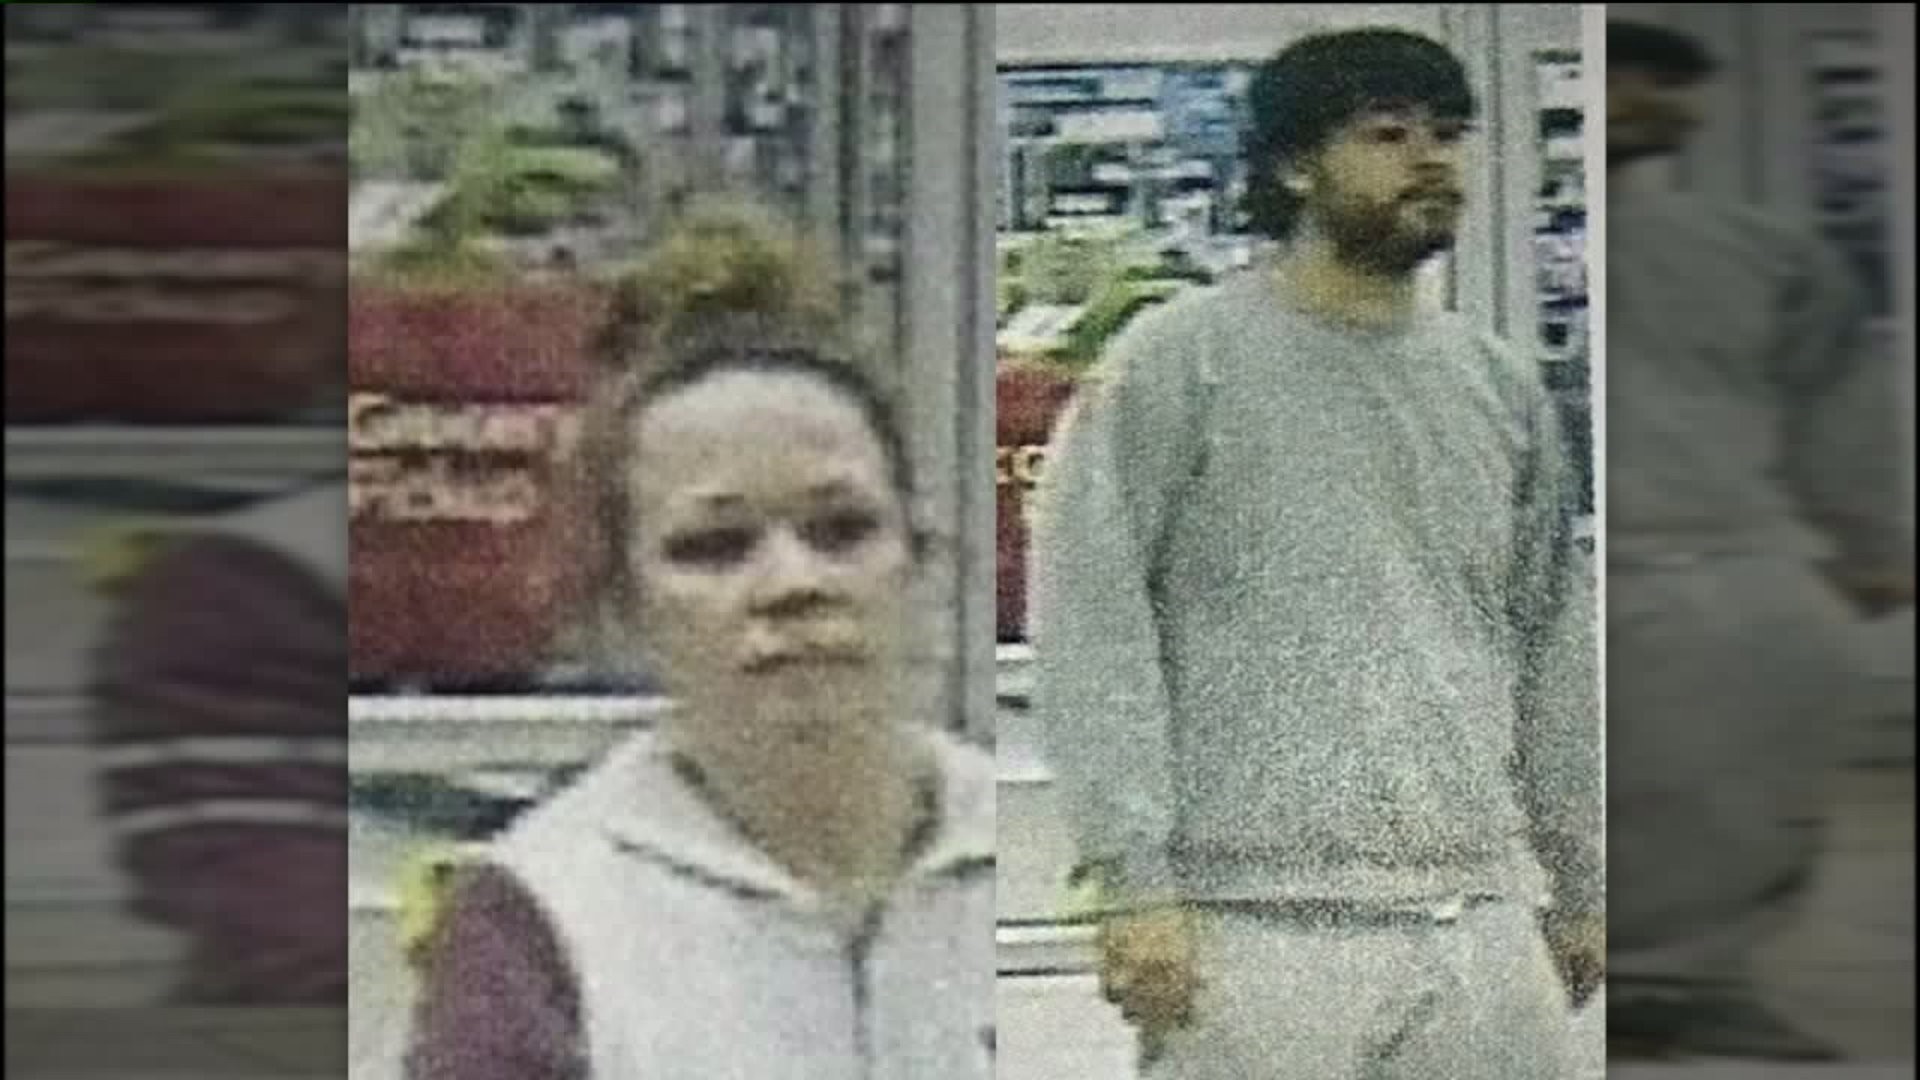 Police Looking for Couple Who Tried to Steal TV from Walmart, Assaulted Loss Prevention Officer